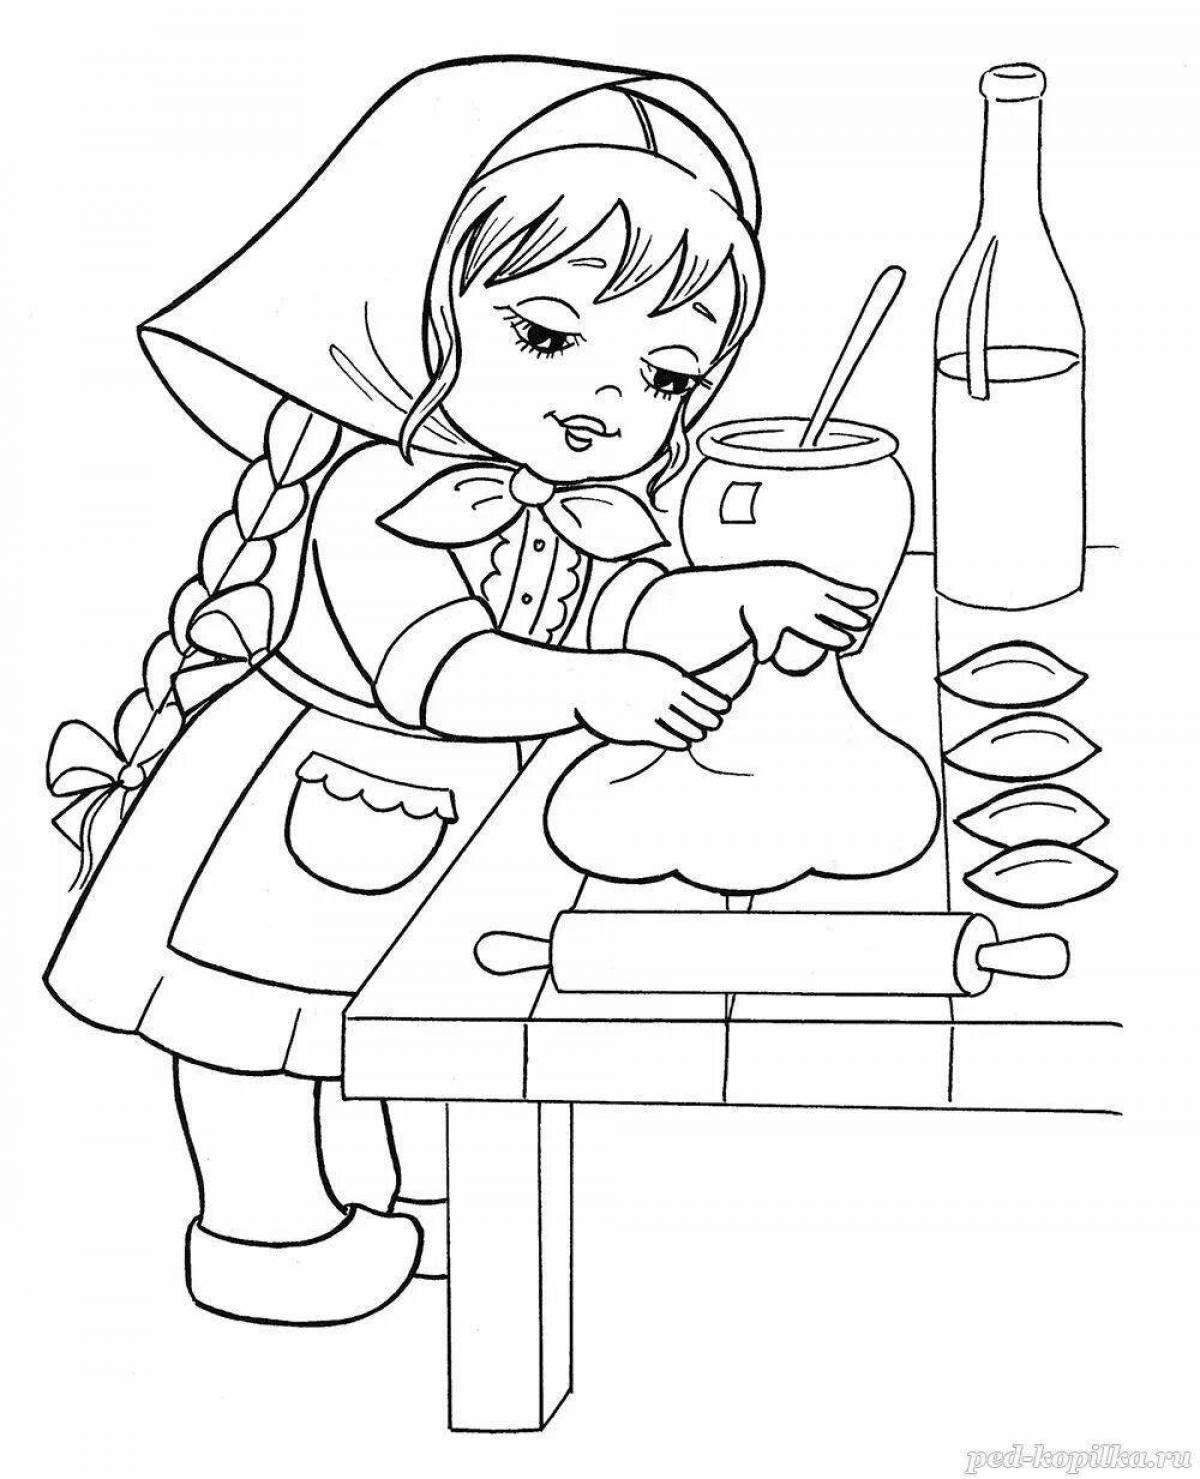 Great fairy tale coloring book for girls